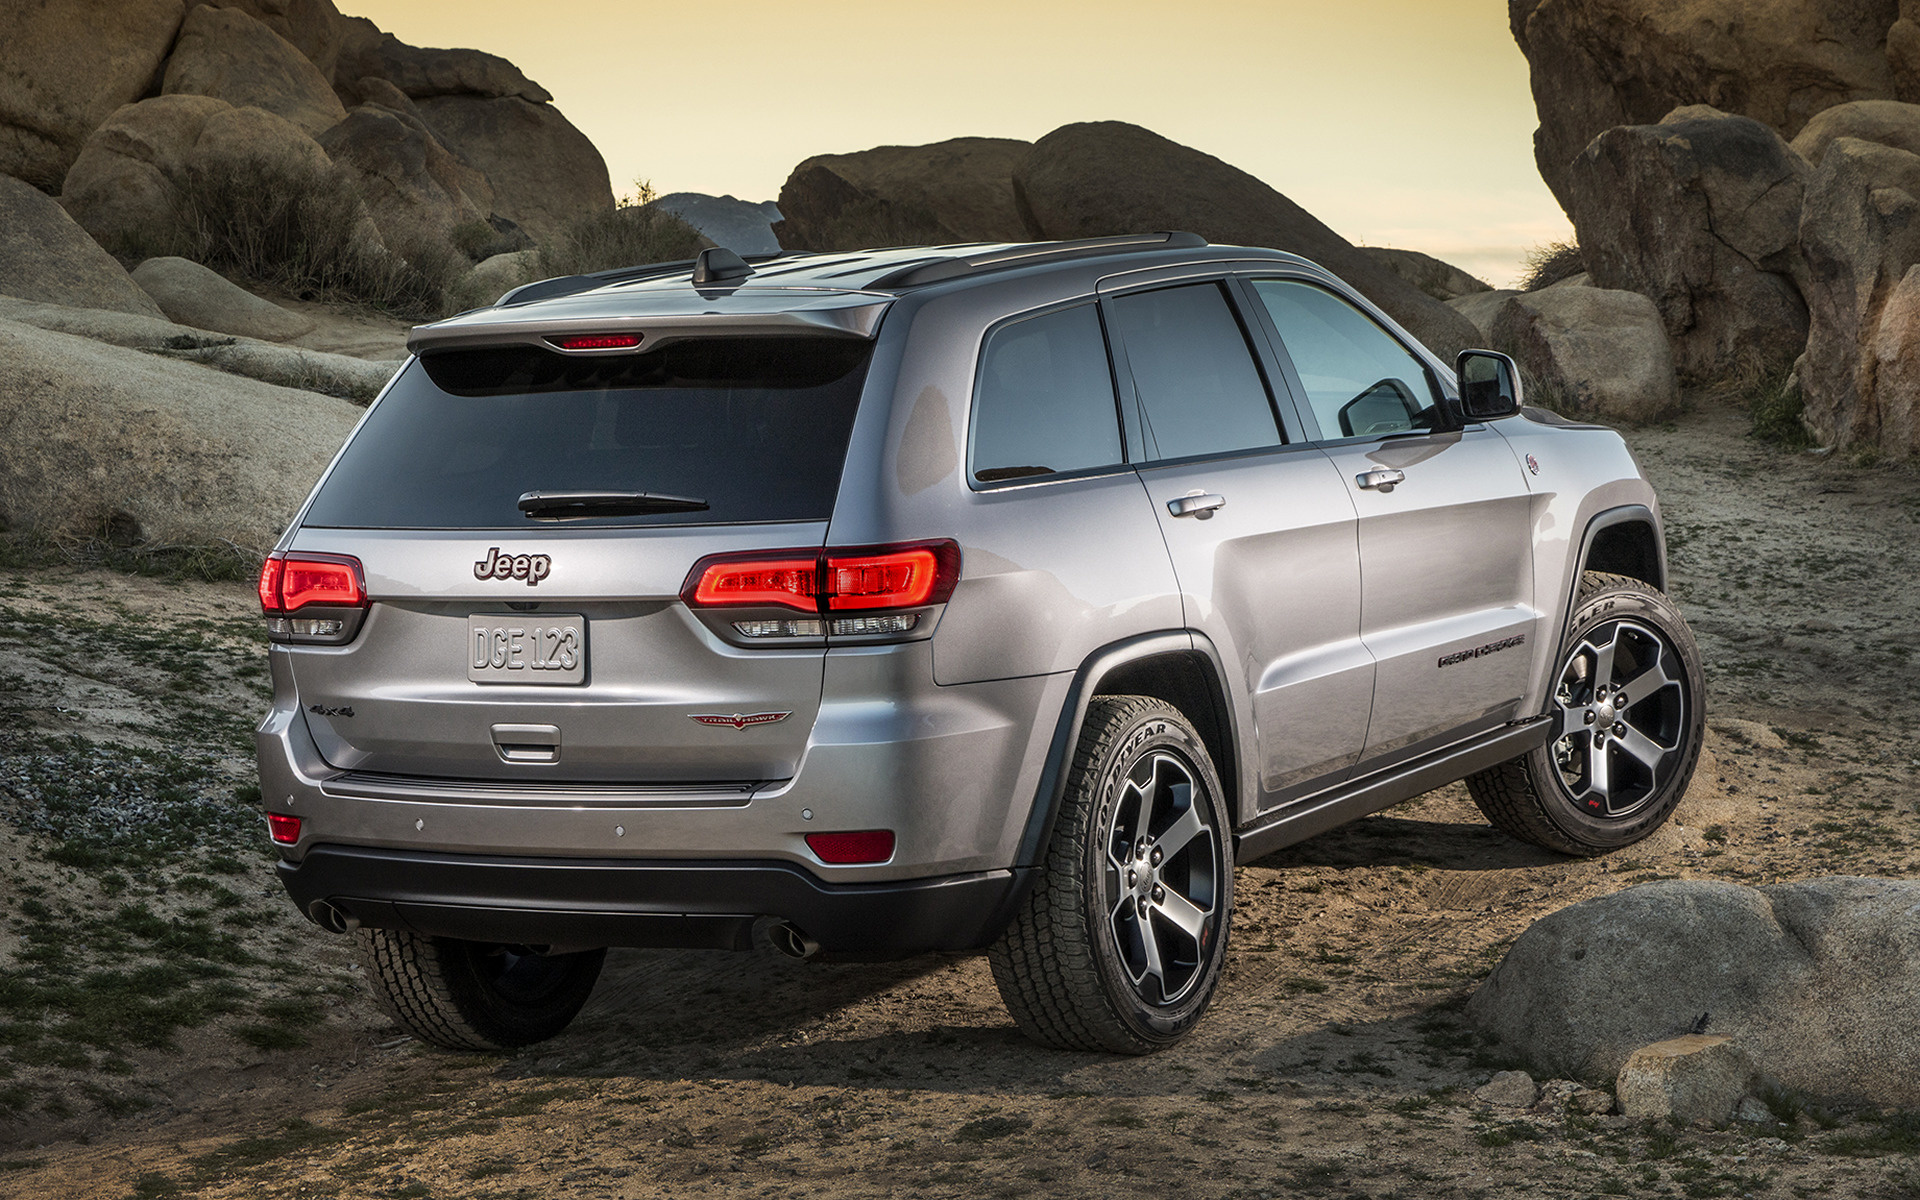 2017 Jeep Grand Cherokee Trailhawk Wallpapers And Hd Images Car Pixel